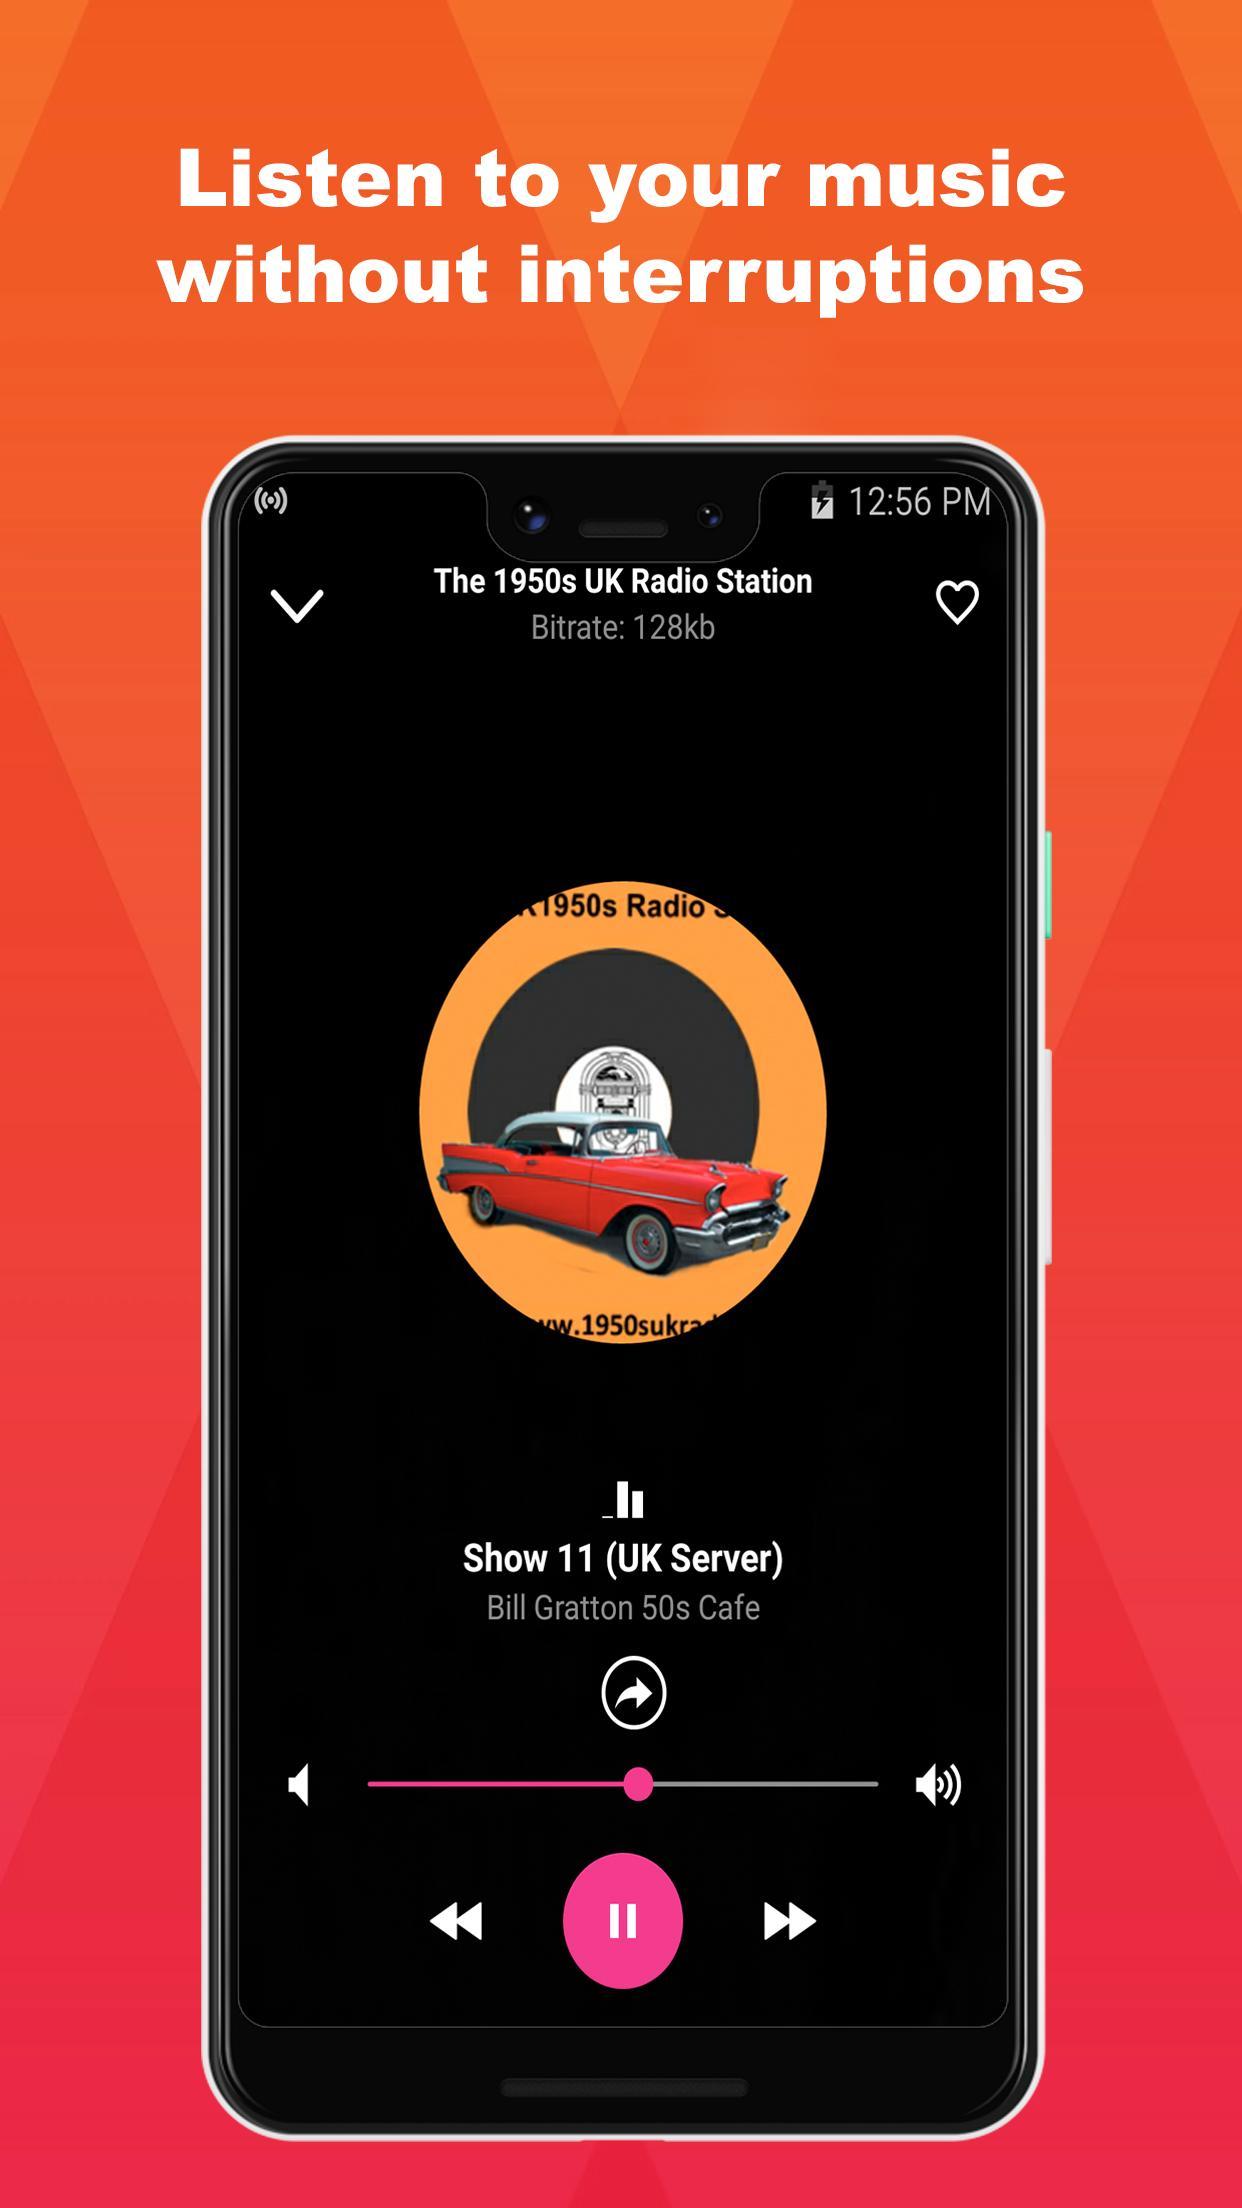 50s and 60s Rock and Roll: Rock and Roll Songs for Android - APK Download